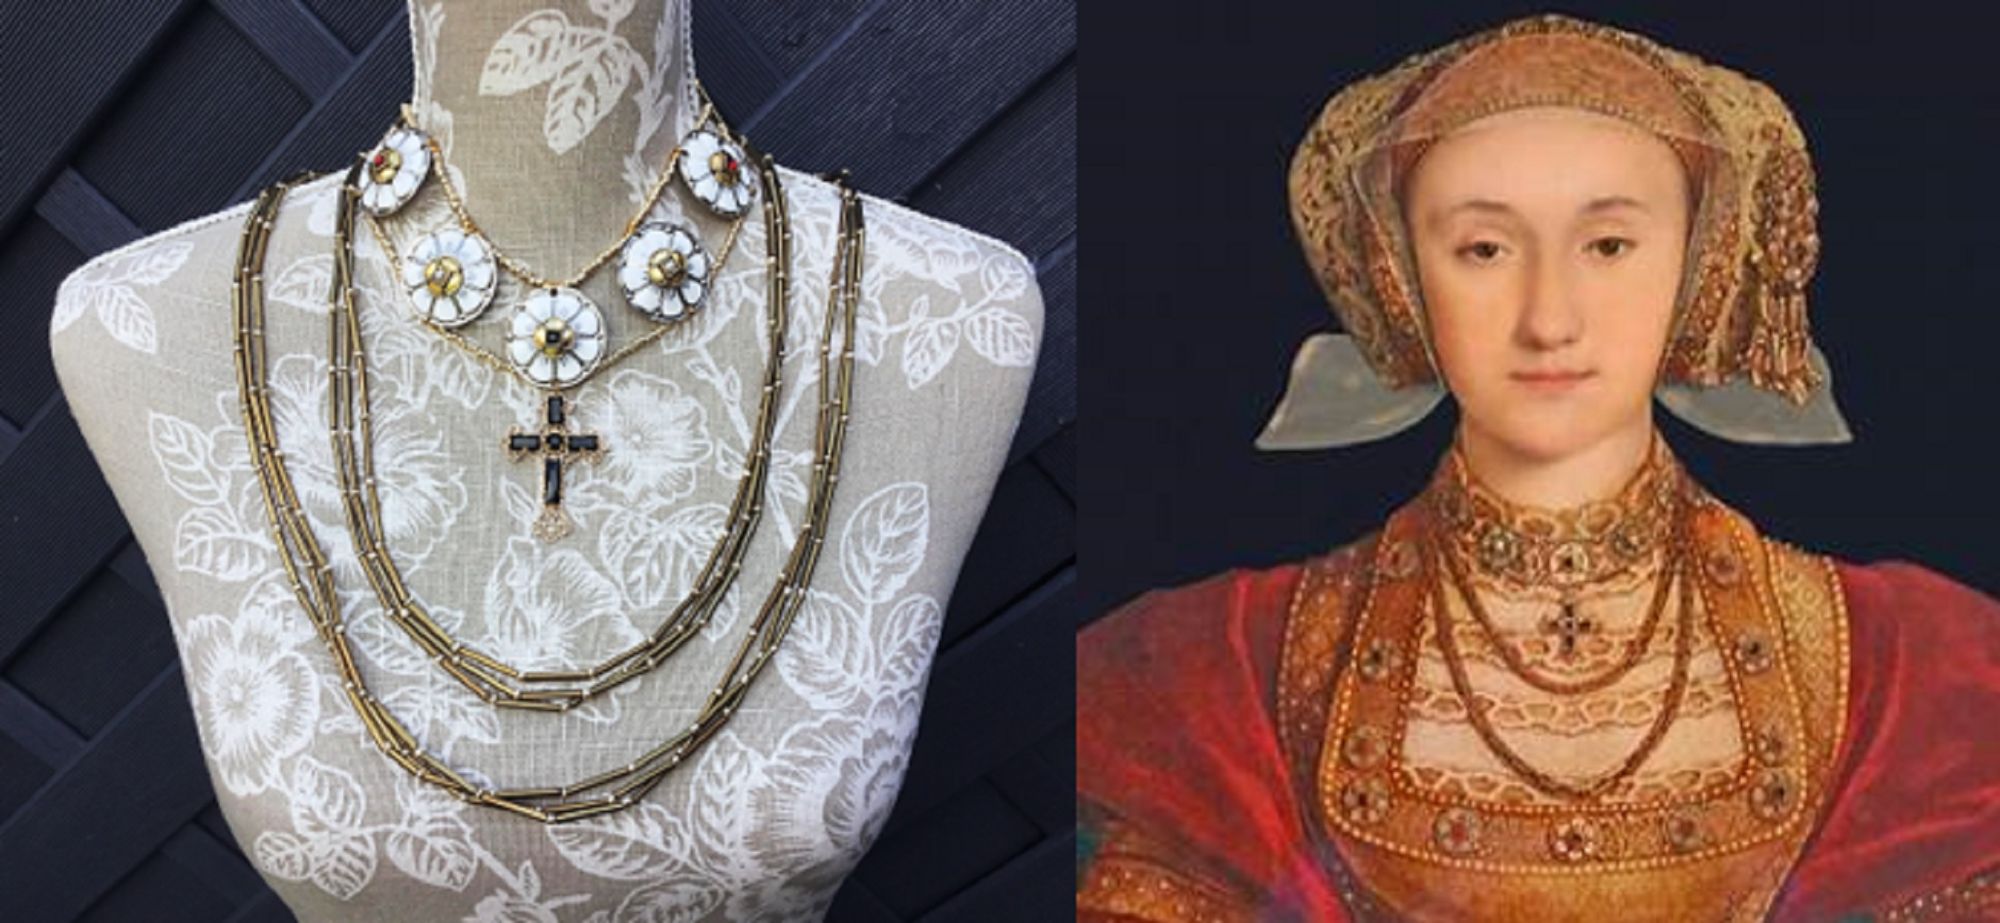 Anne of cleves compare best